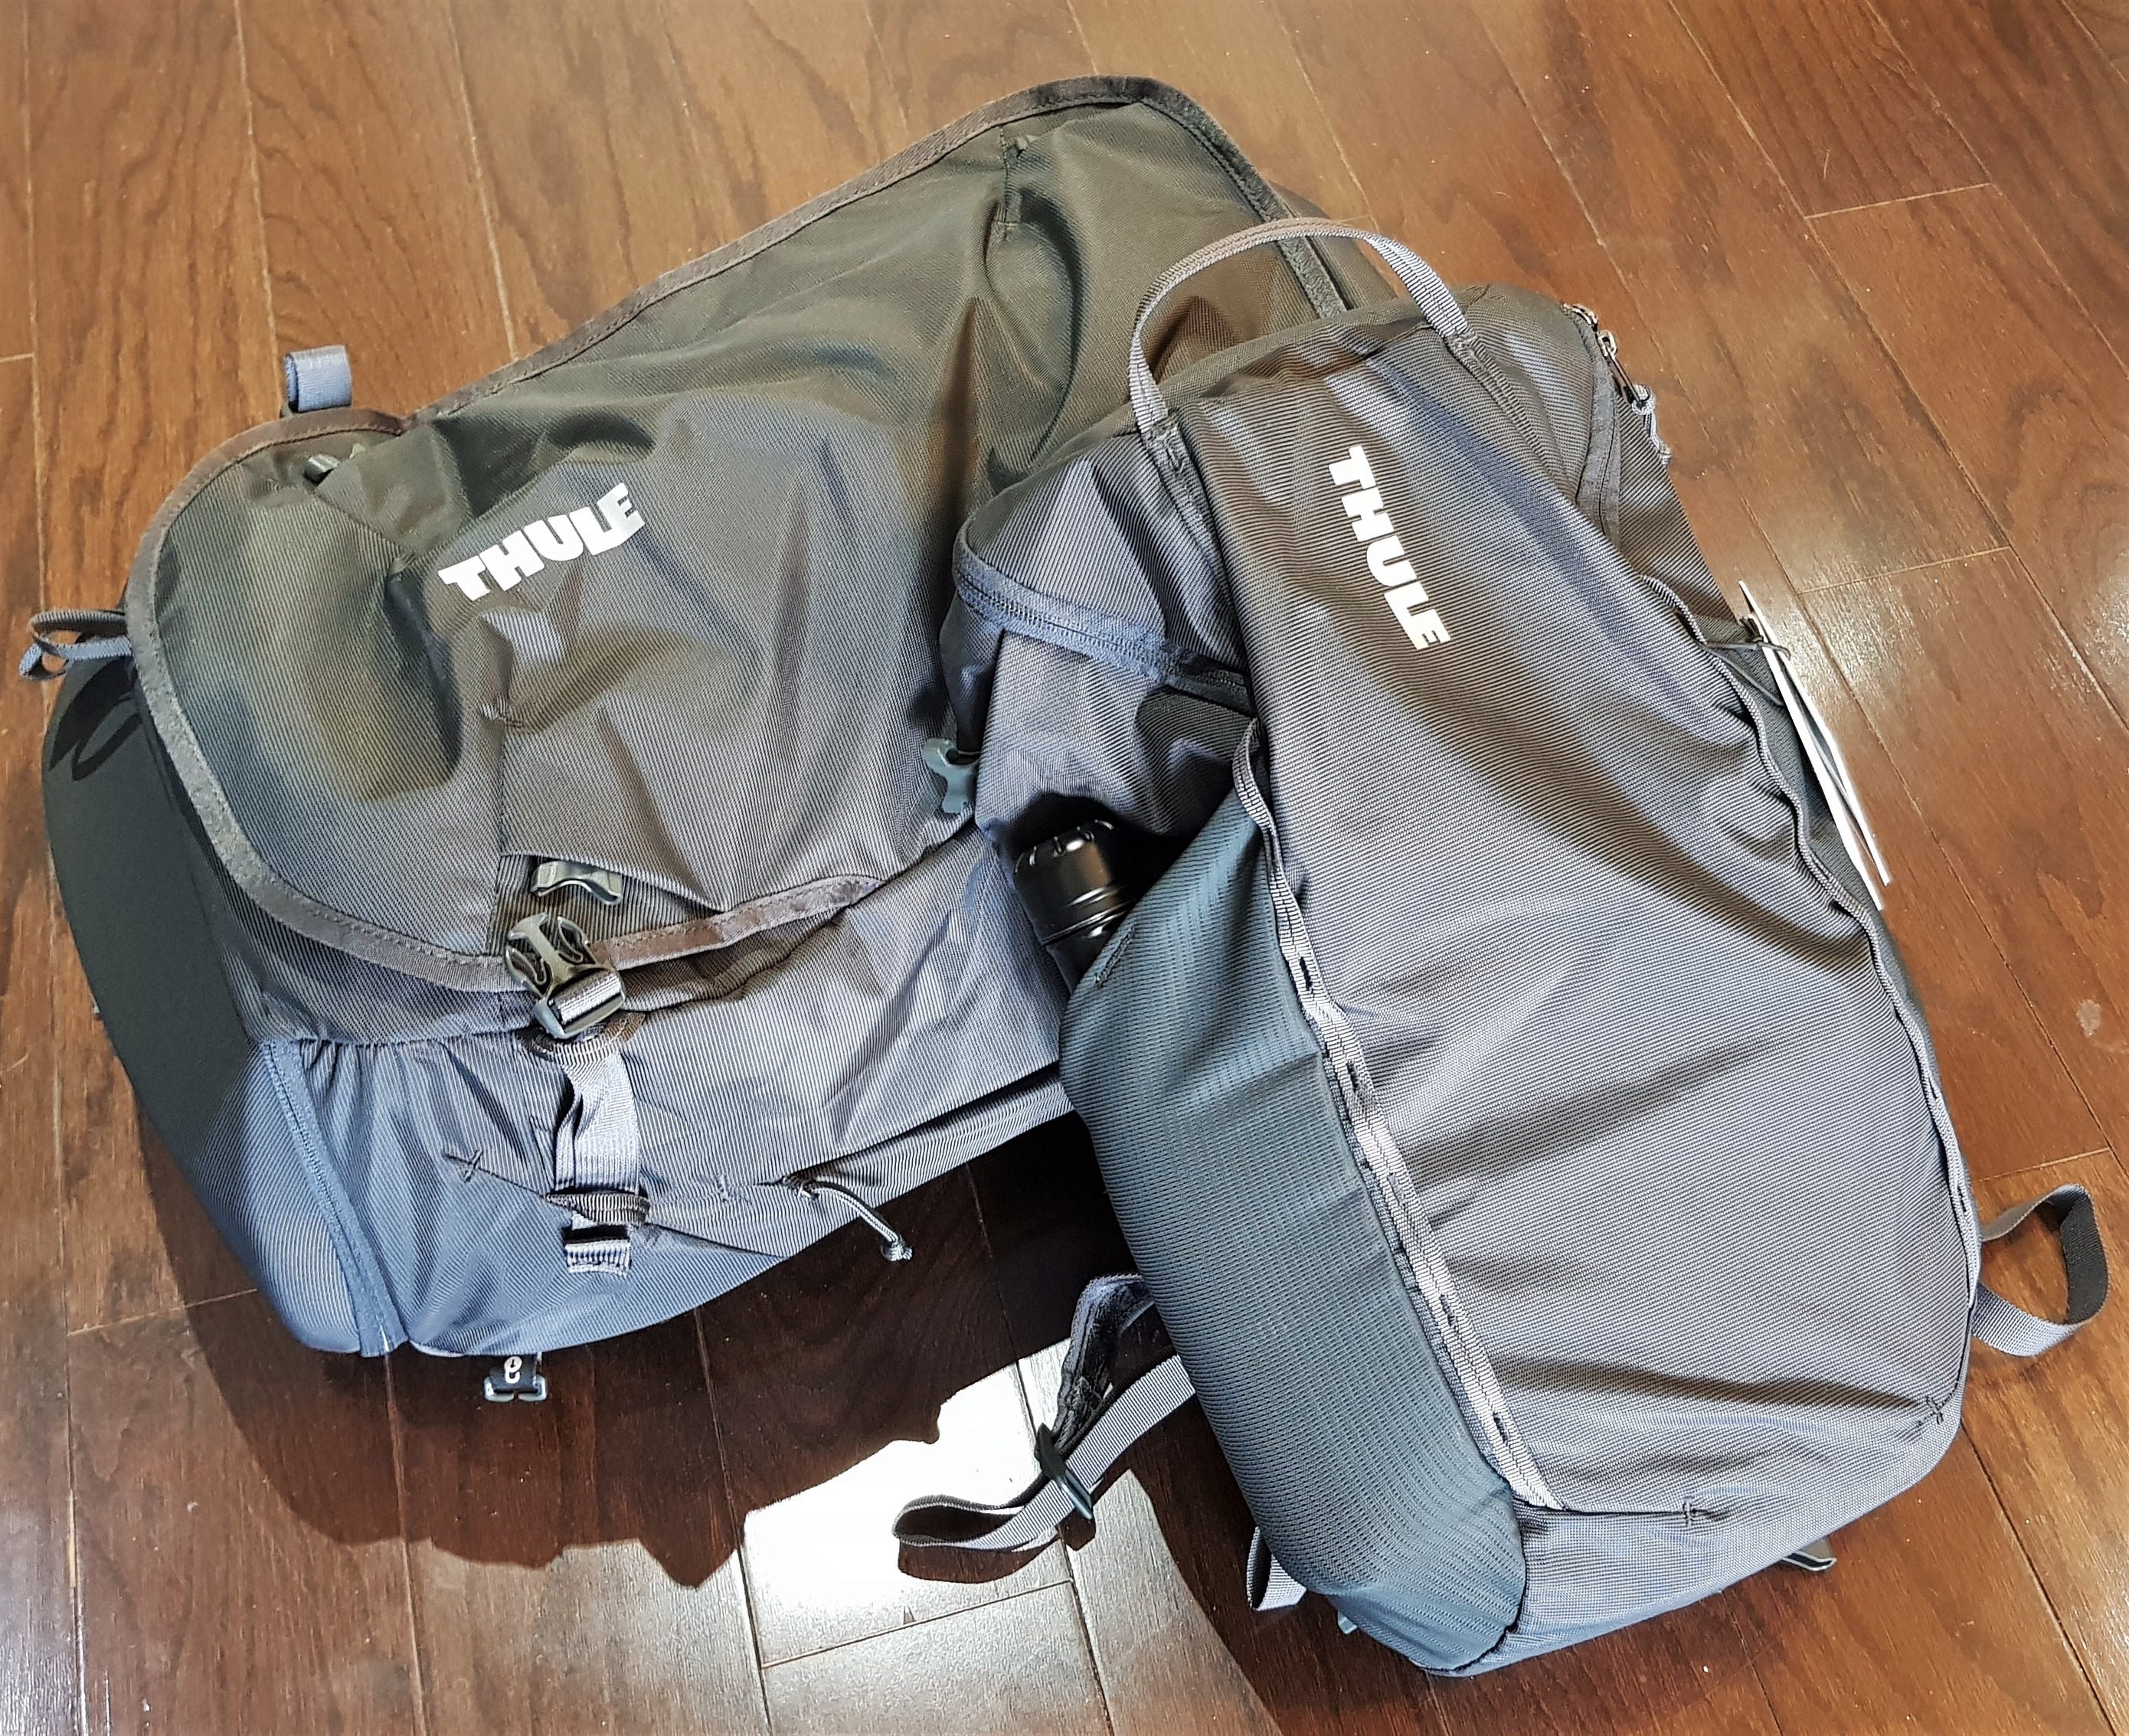 THULE Landmark 60 Backpack Review | by Geoff | Pangolins with Packs